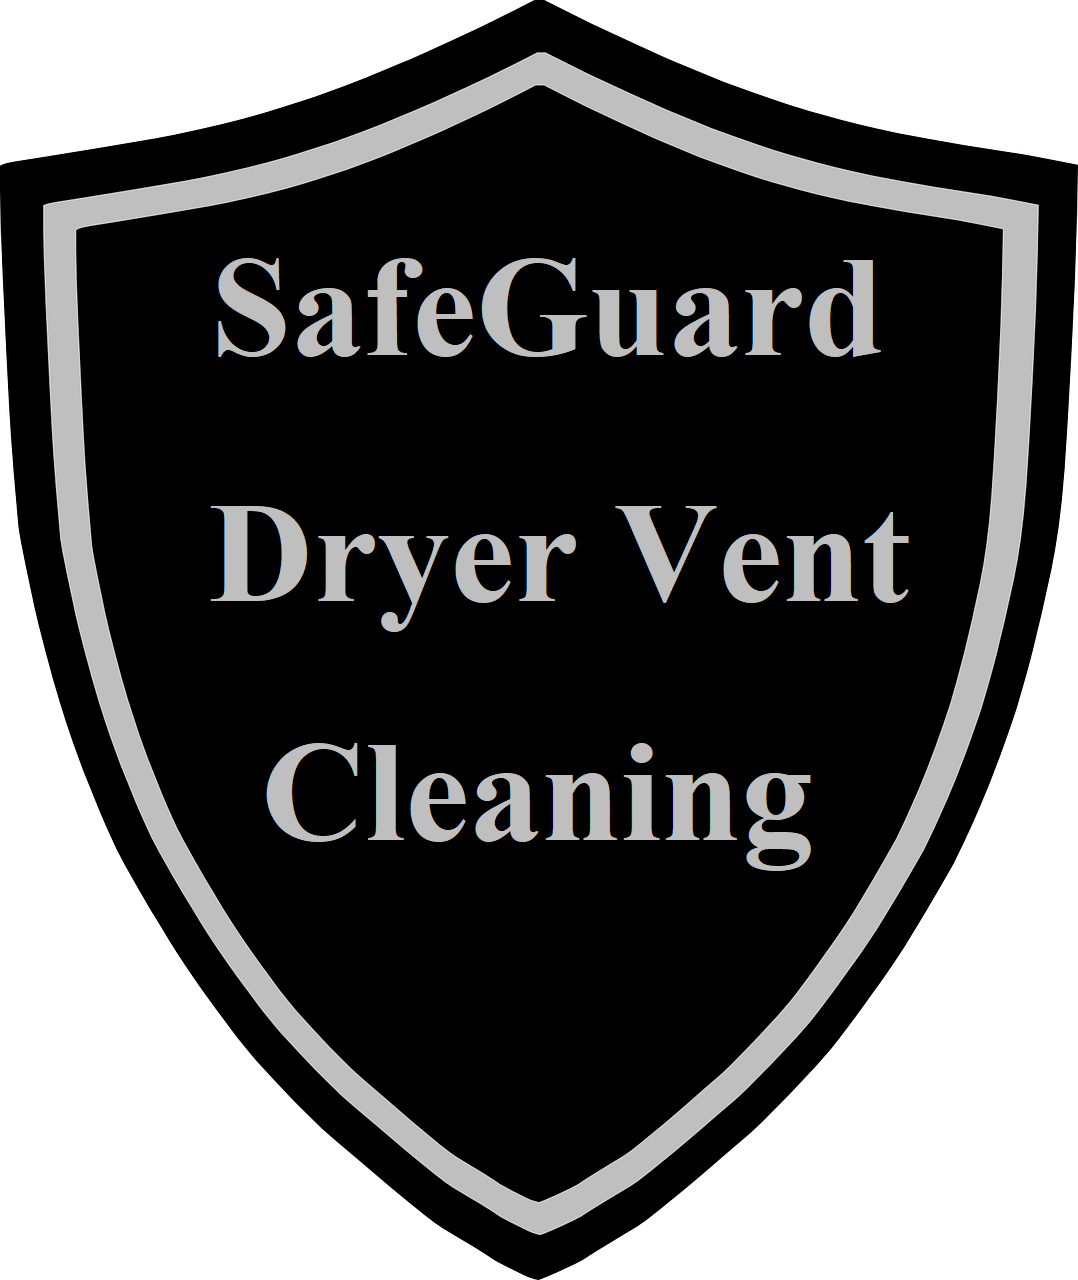 safeguard dryer vent cleaning logo